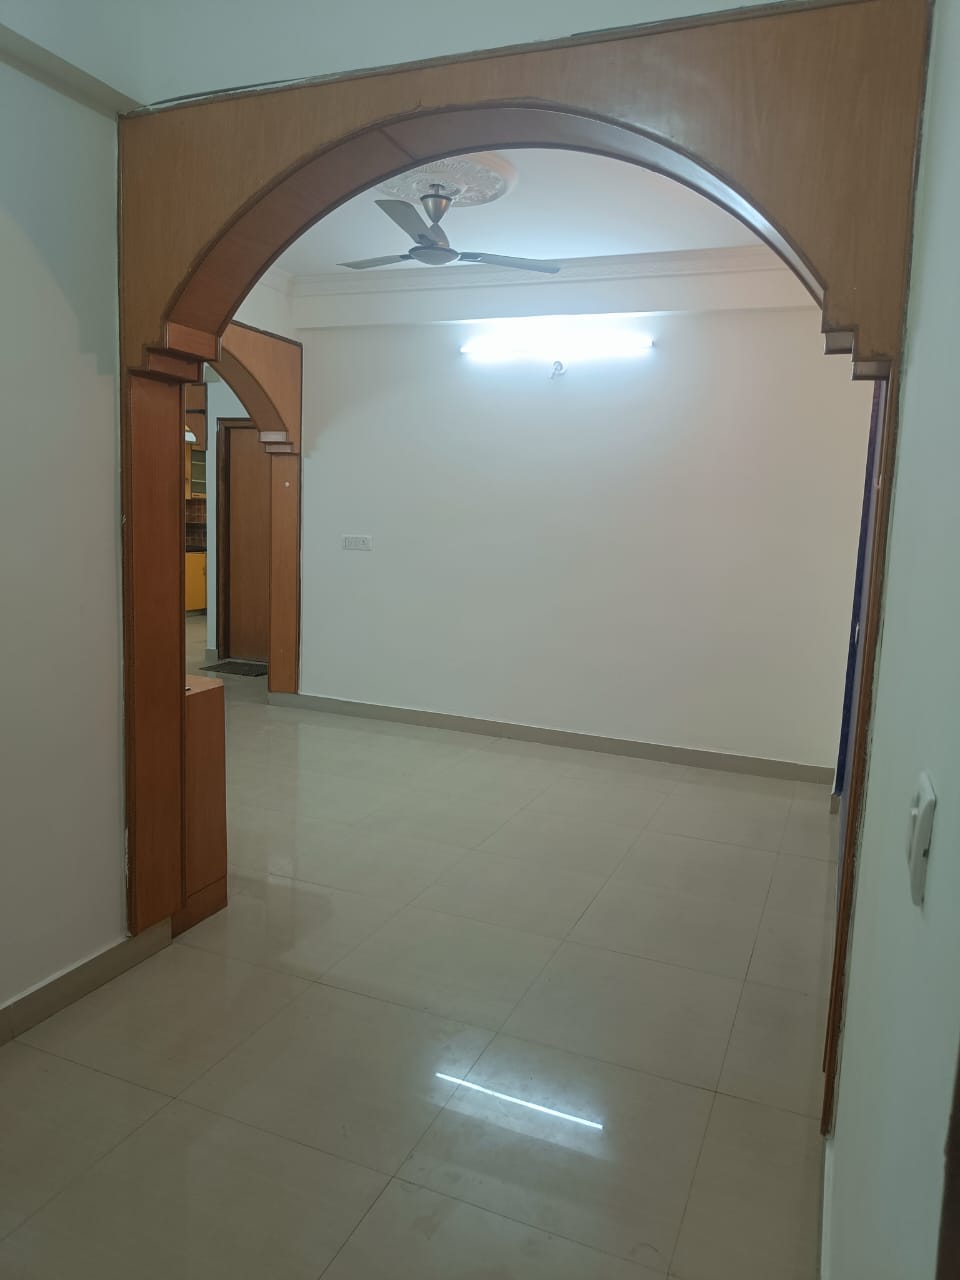 2 BHK Residential Apartment for Lease Only at JAML2 - 820 in Marathahalli